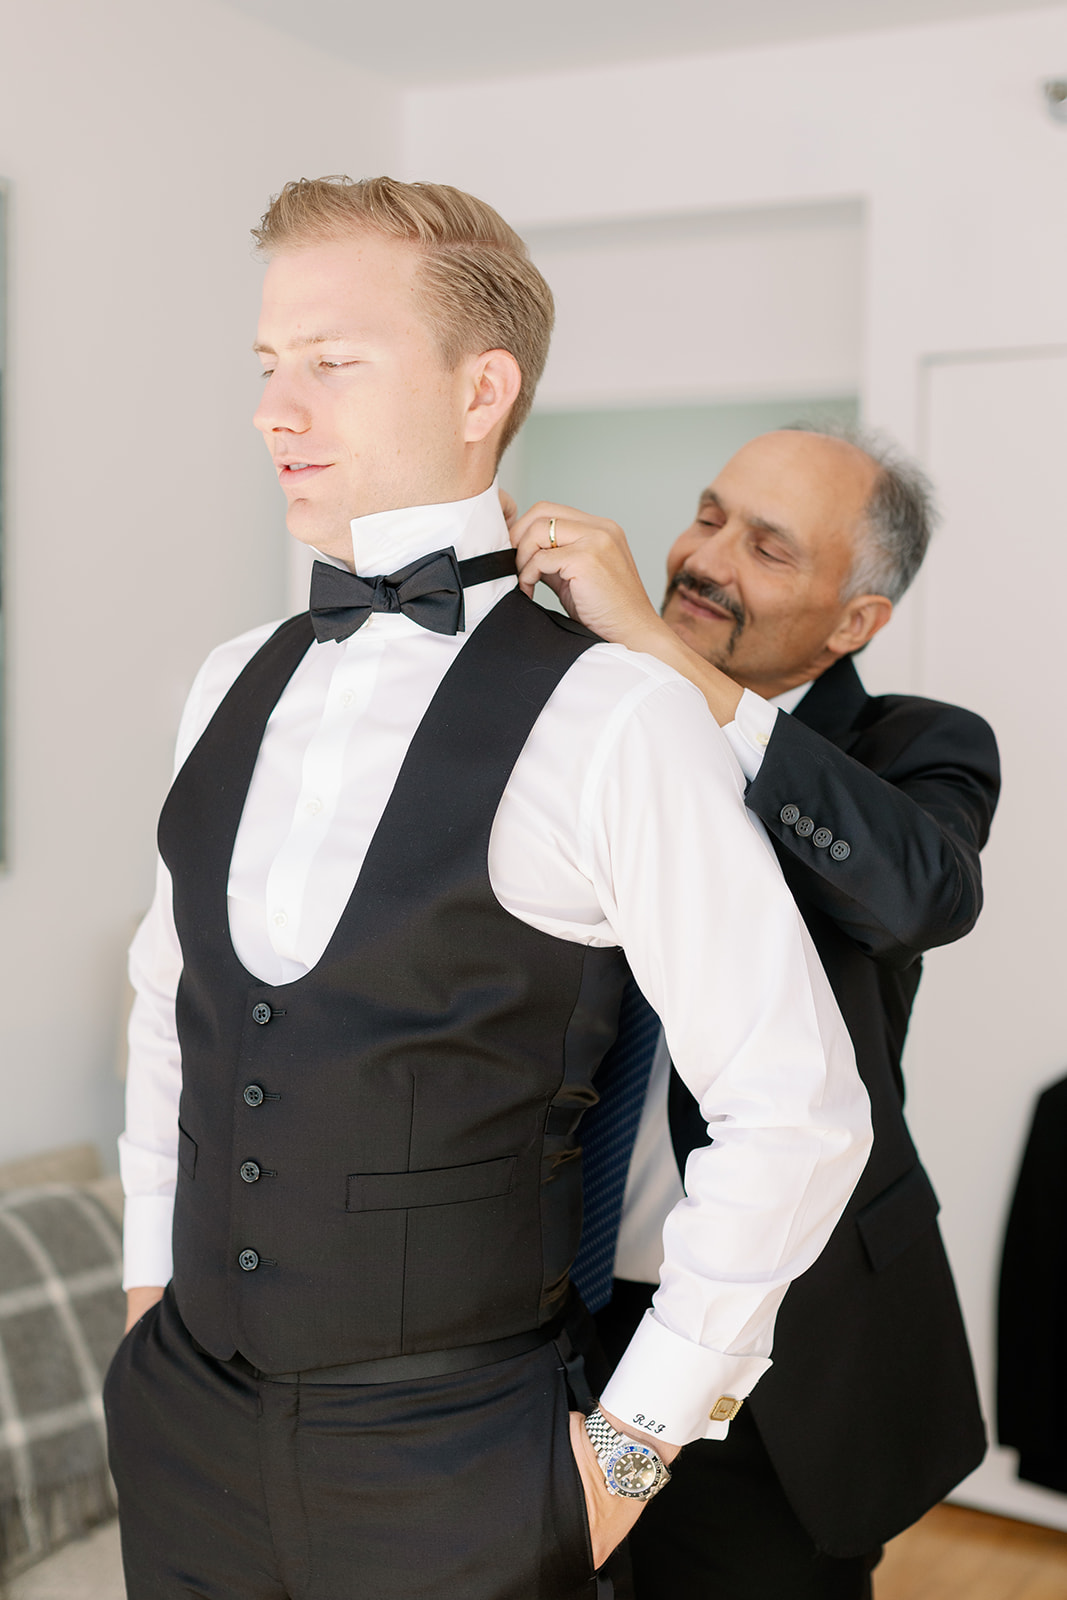 Groom gets ready, captured in a candid portrait, as his father helps with the bowtie in a New York wedding moment.